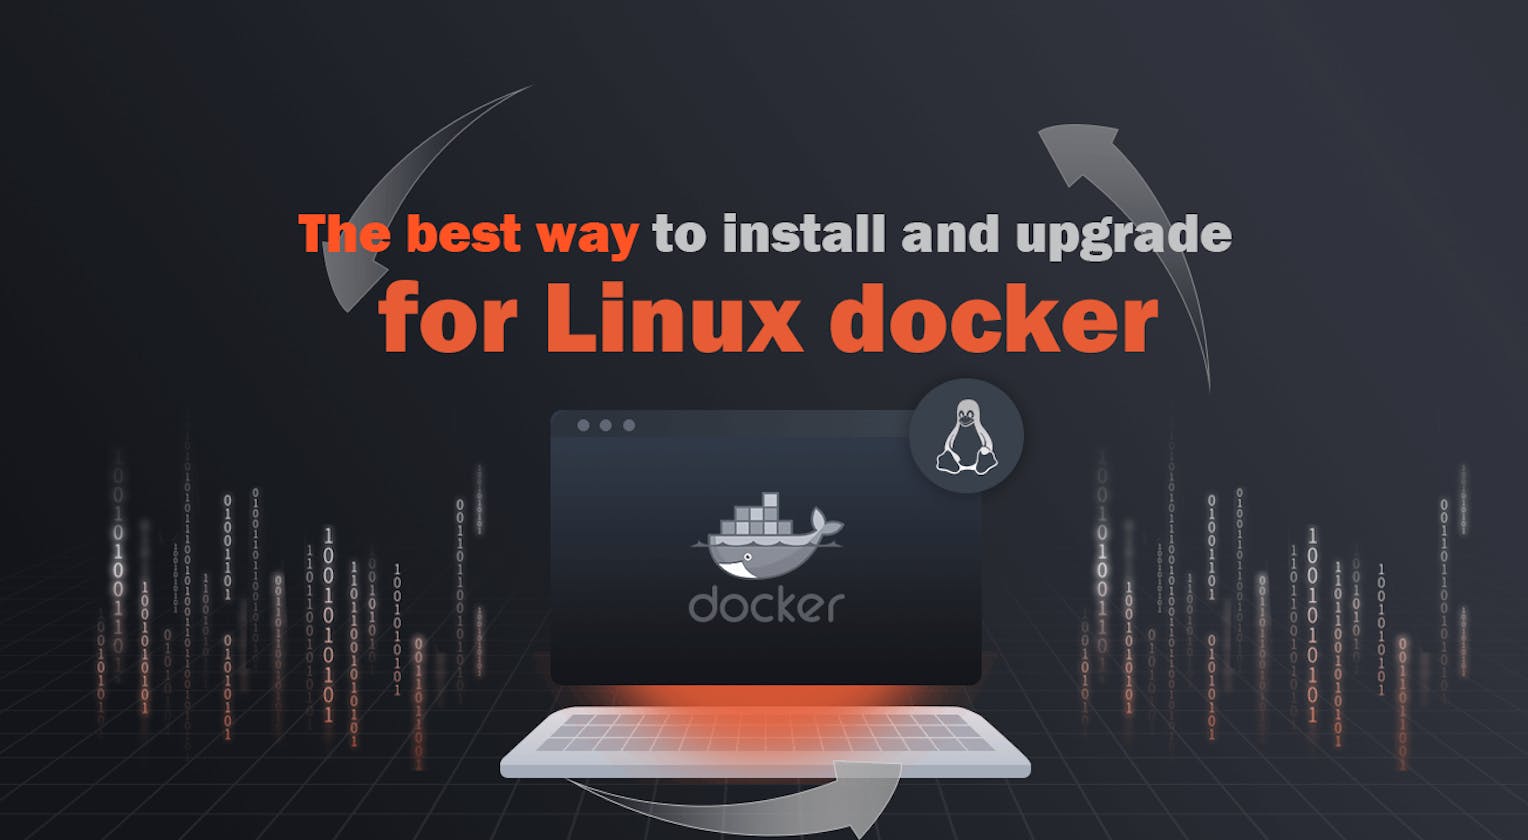 The best way to install and upgrade for Linux docker